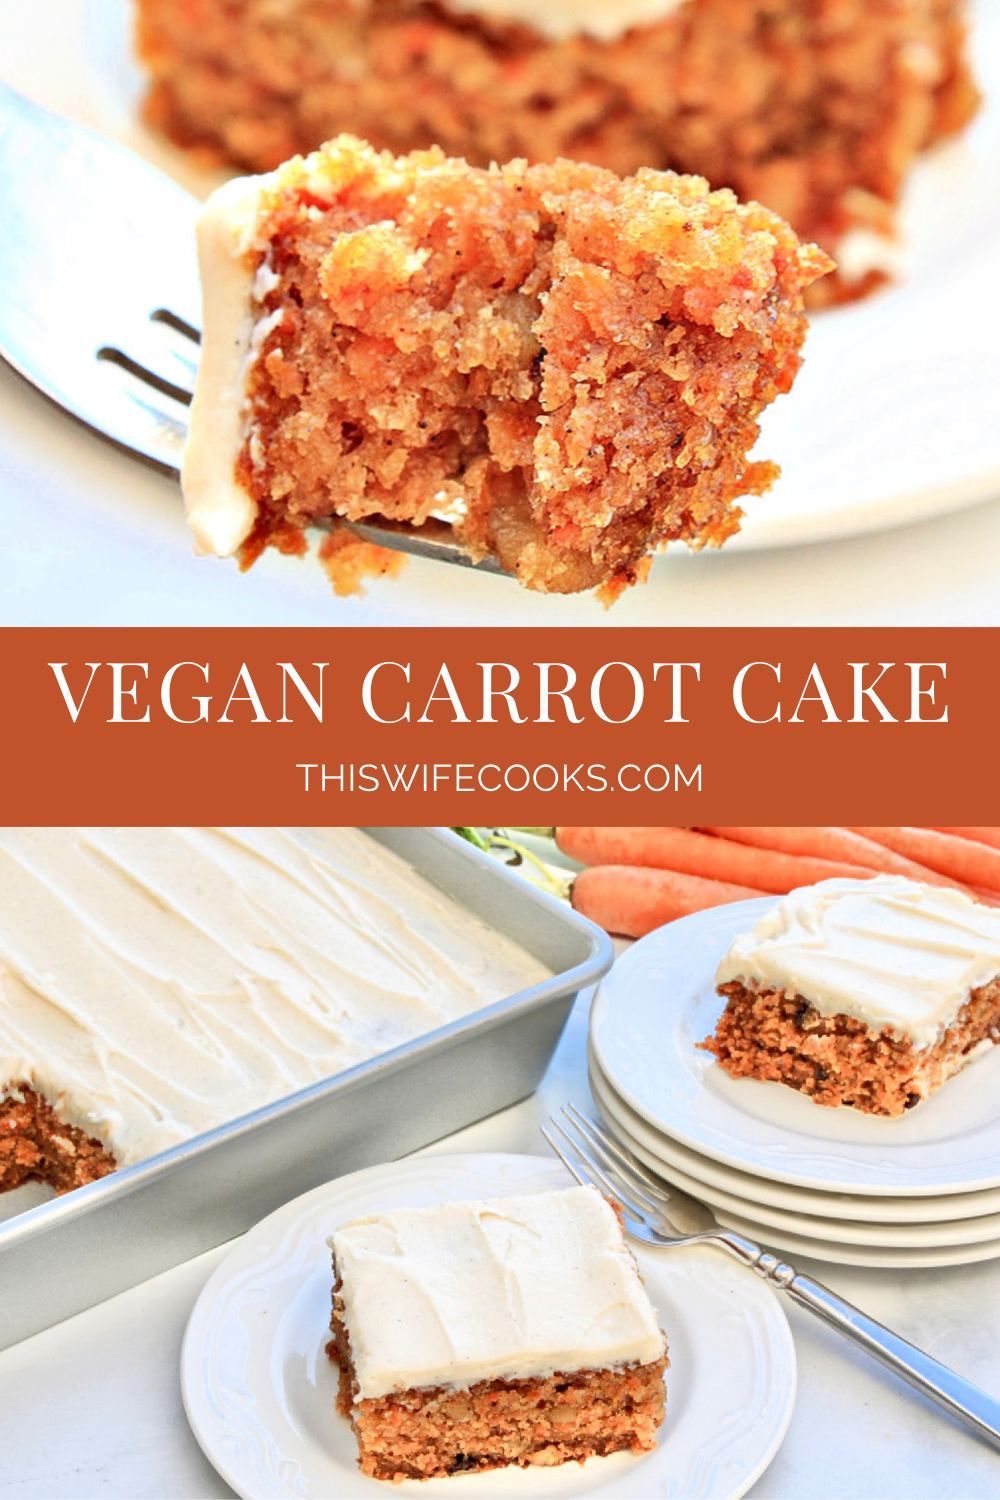 Vegan Carrot Cake ~ This light and tender cake is perfectly sweet, loaded with freshly grated carrots, studded with walnuts, and infused with warm spices of cinnamon and nutmeg in every bite! via @thiswifecooks